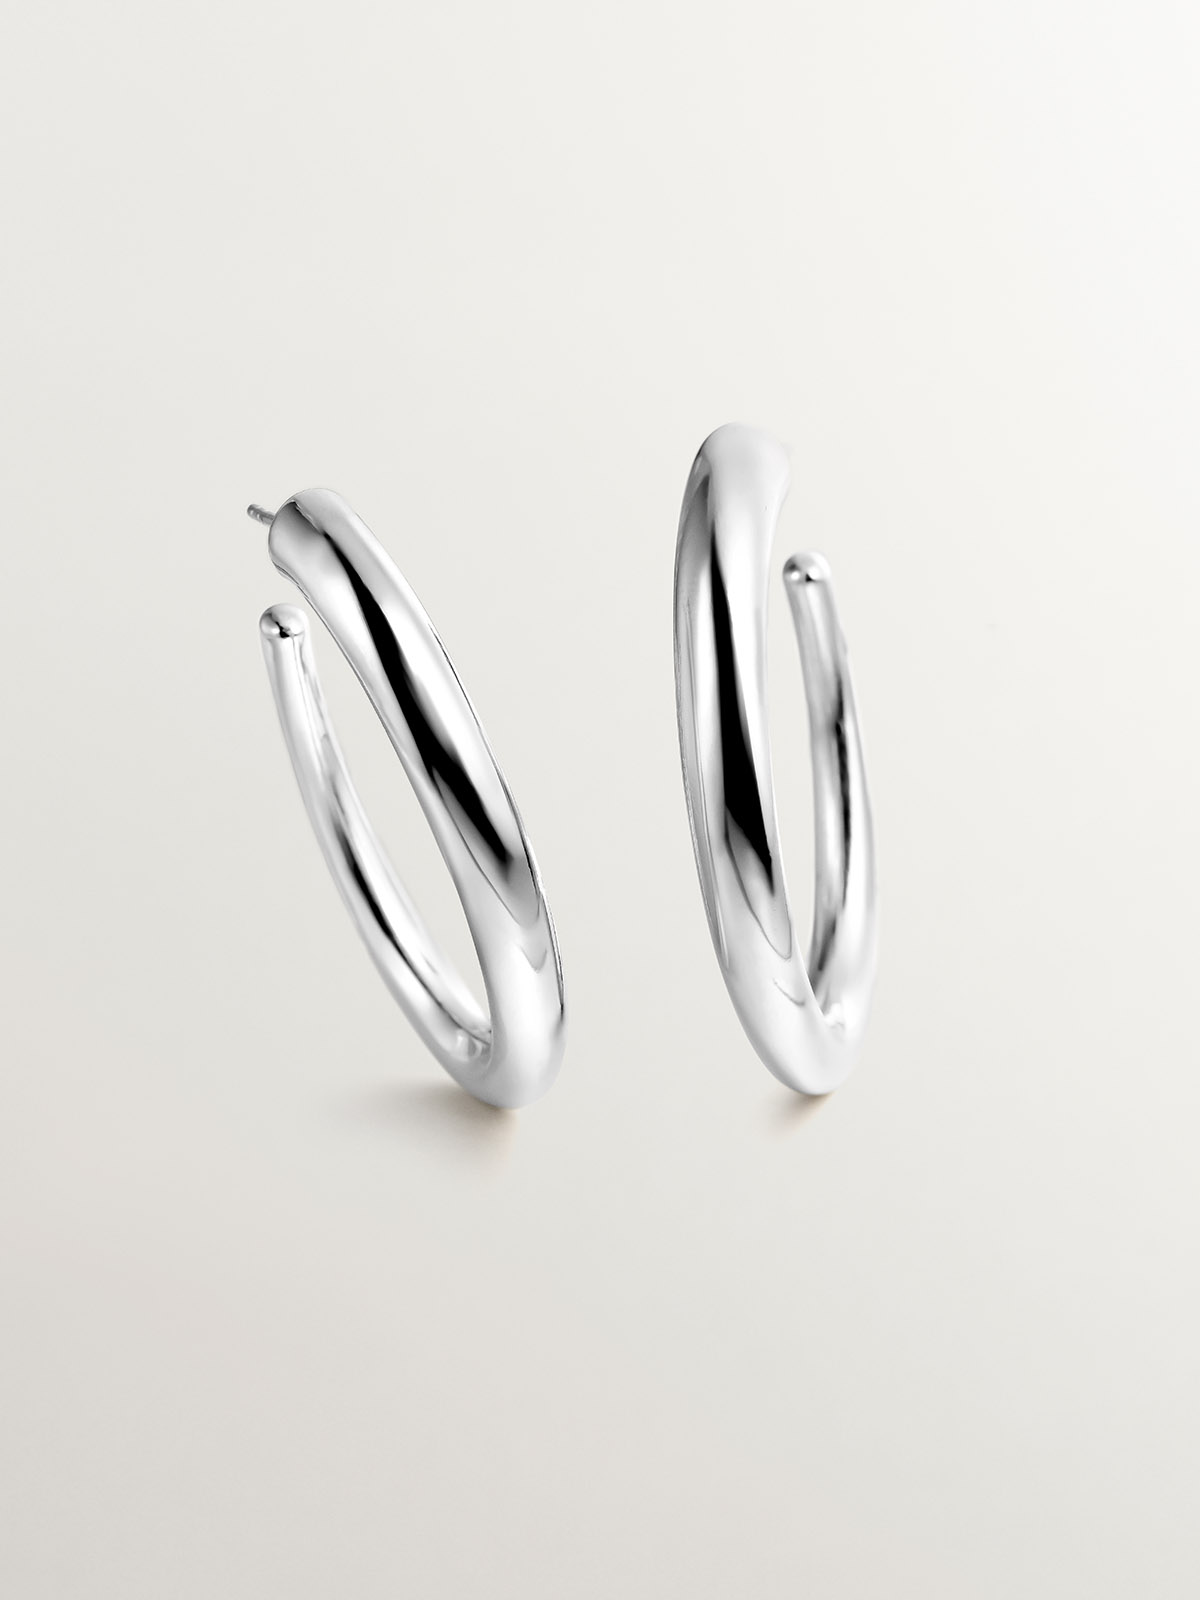 Large 925 silver hoop earrings with an oval shape